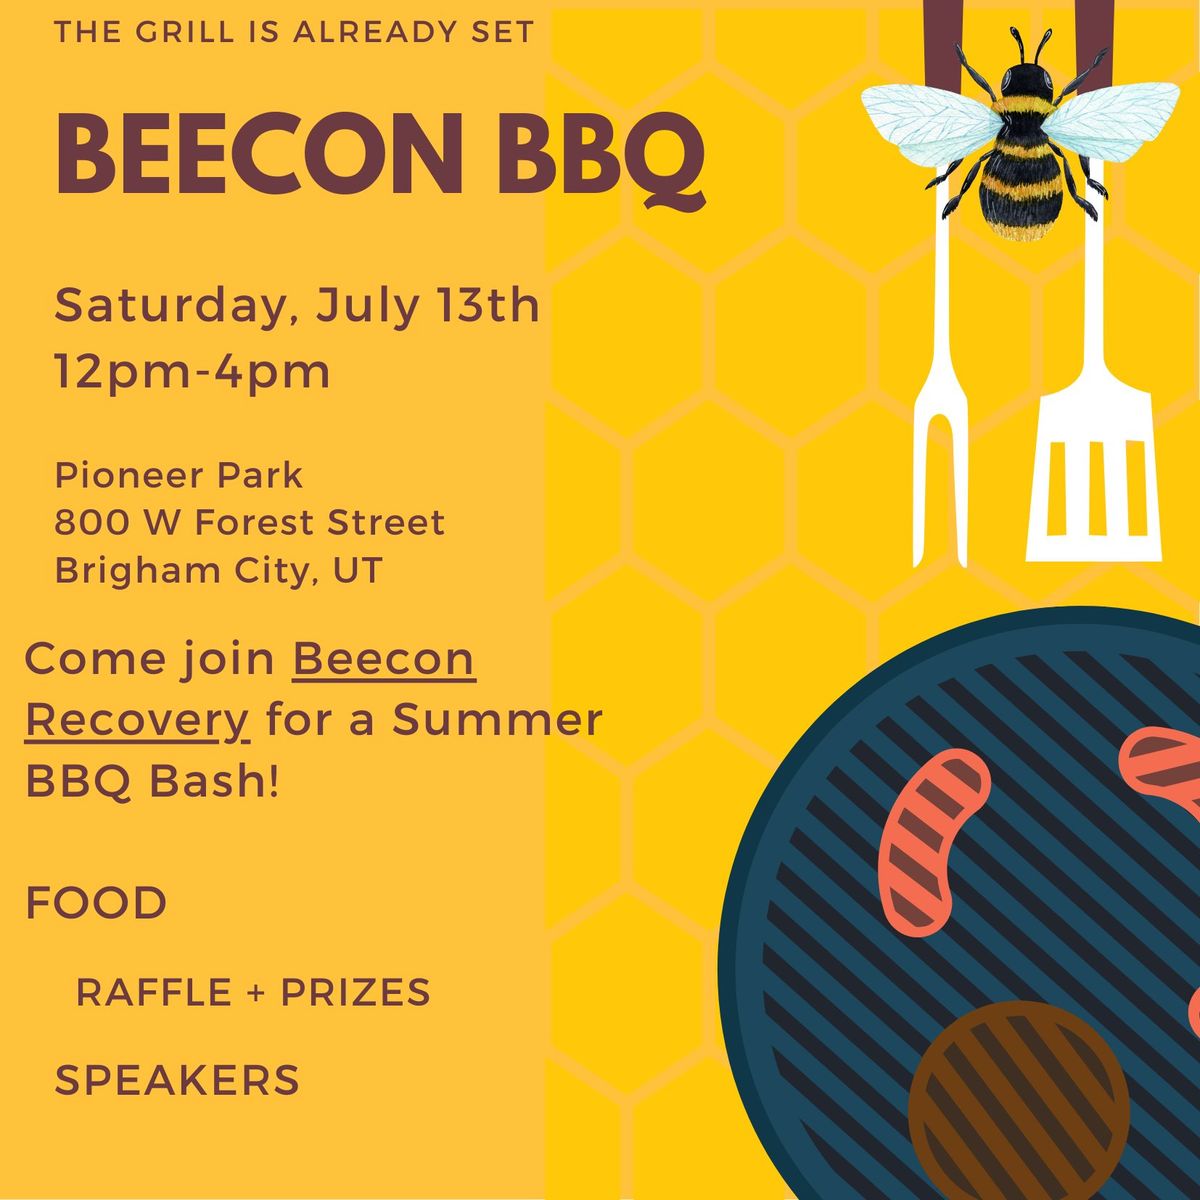 Beecon BBQ